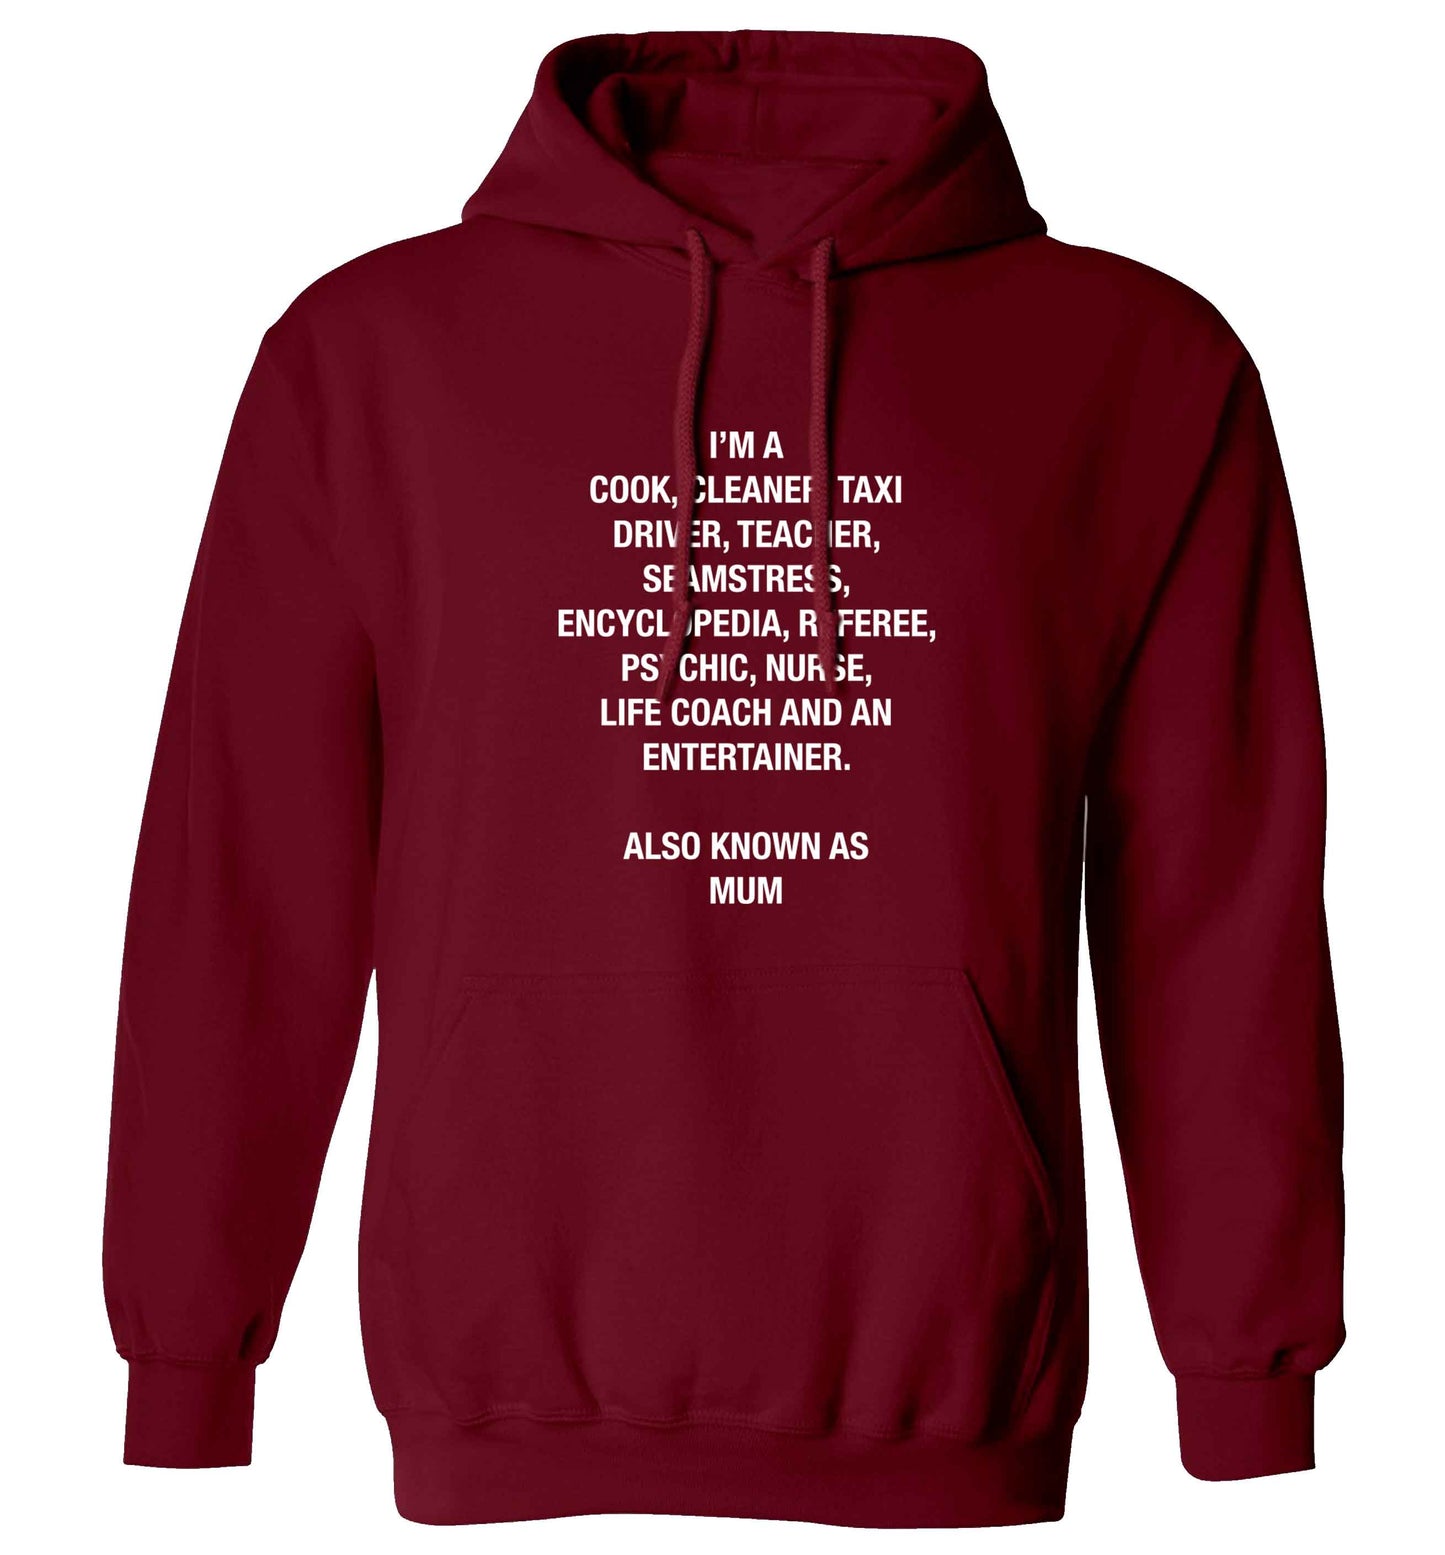 Funny gifts for your mum on mother's dayor her birthday! Mum, cook, cleaner, taxi driver, teacher, seamstress, encyclopedia, referee, psychic, nurse, life coach and entertainer adults unisex maroon hoodie 2XL